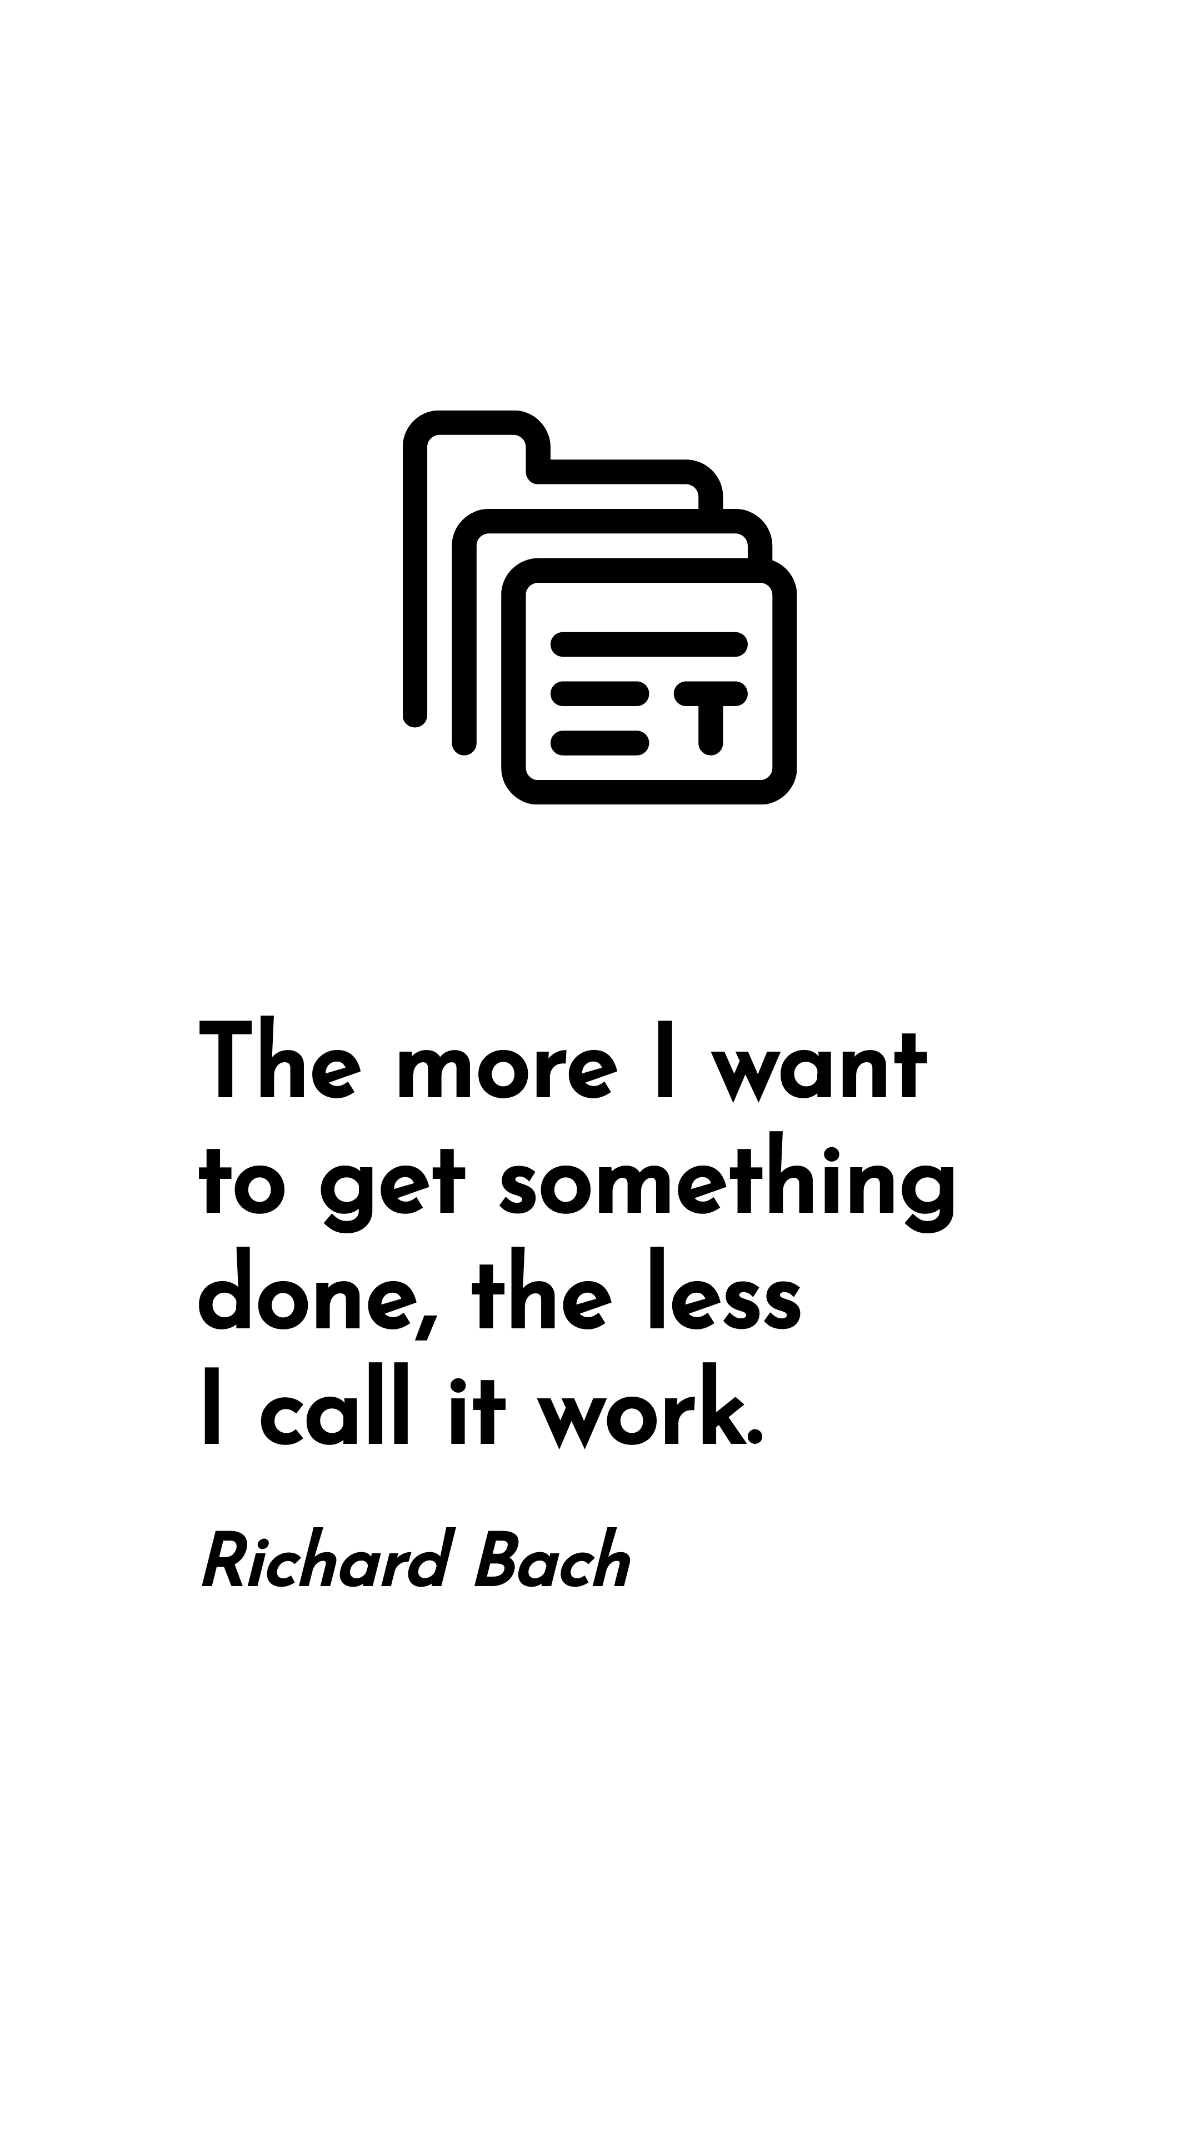 Free Richard Bach - The more I want to get something done, the less I call it work. Template